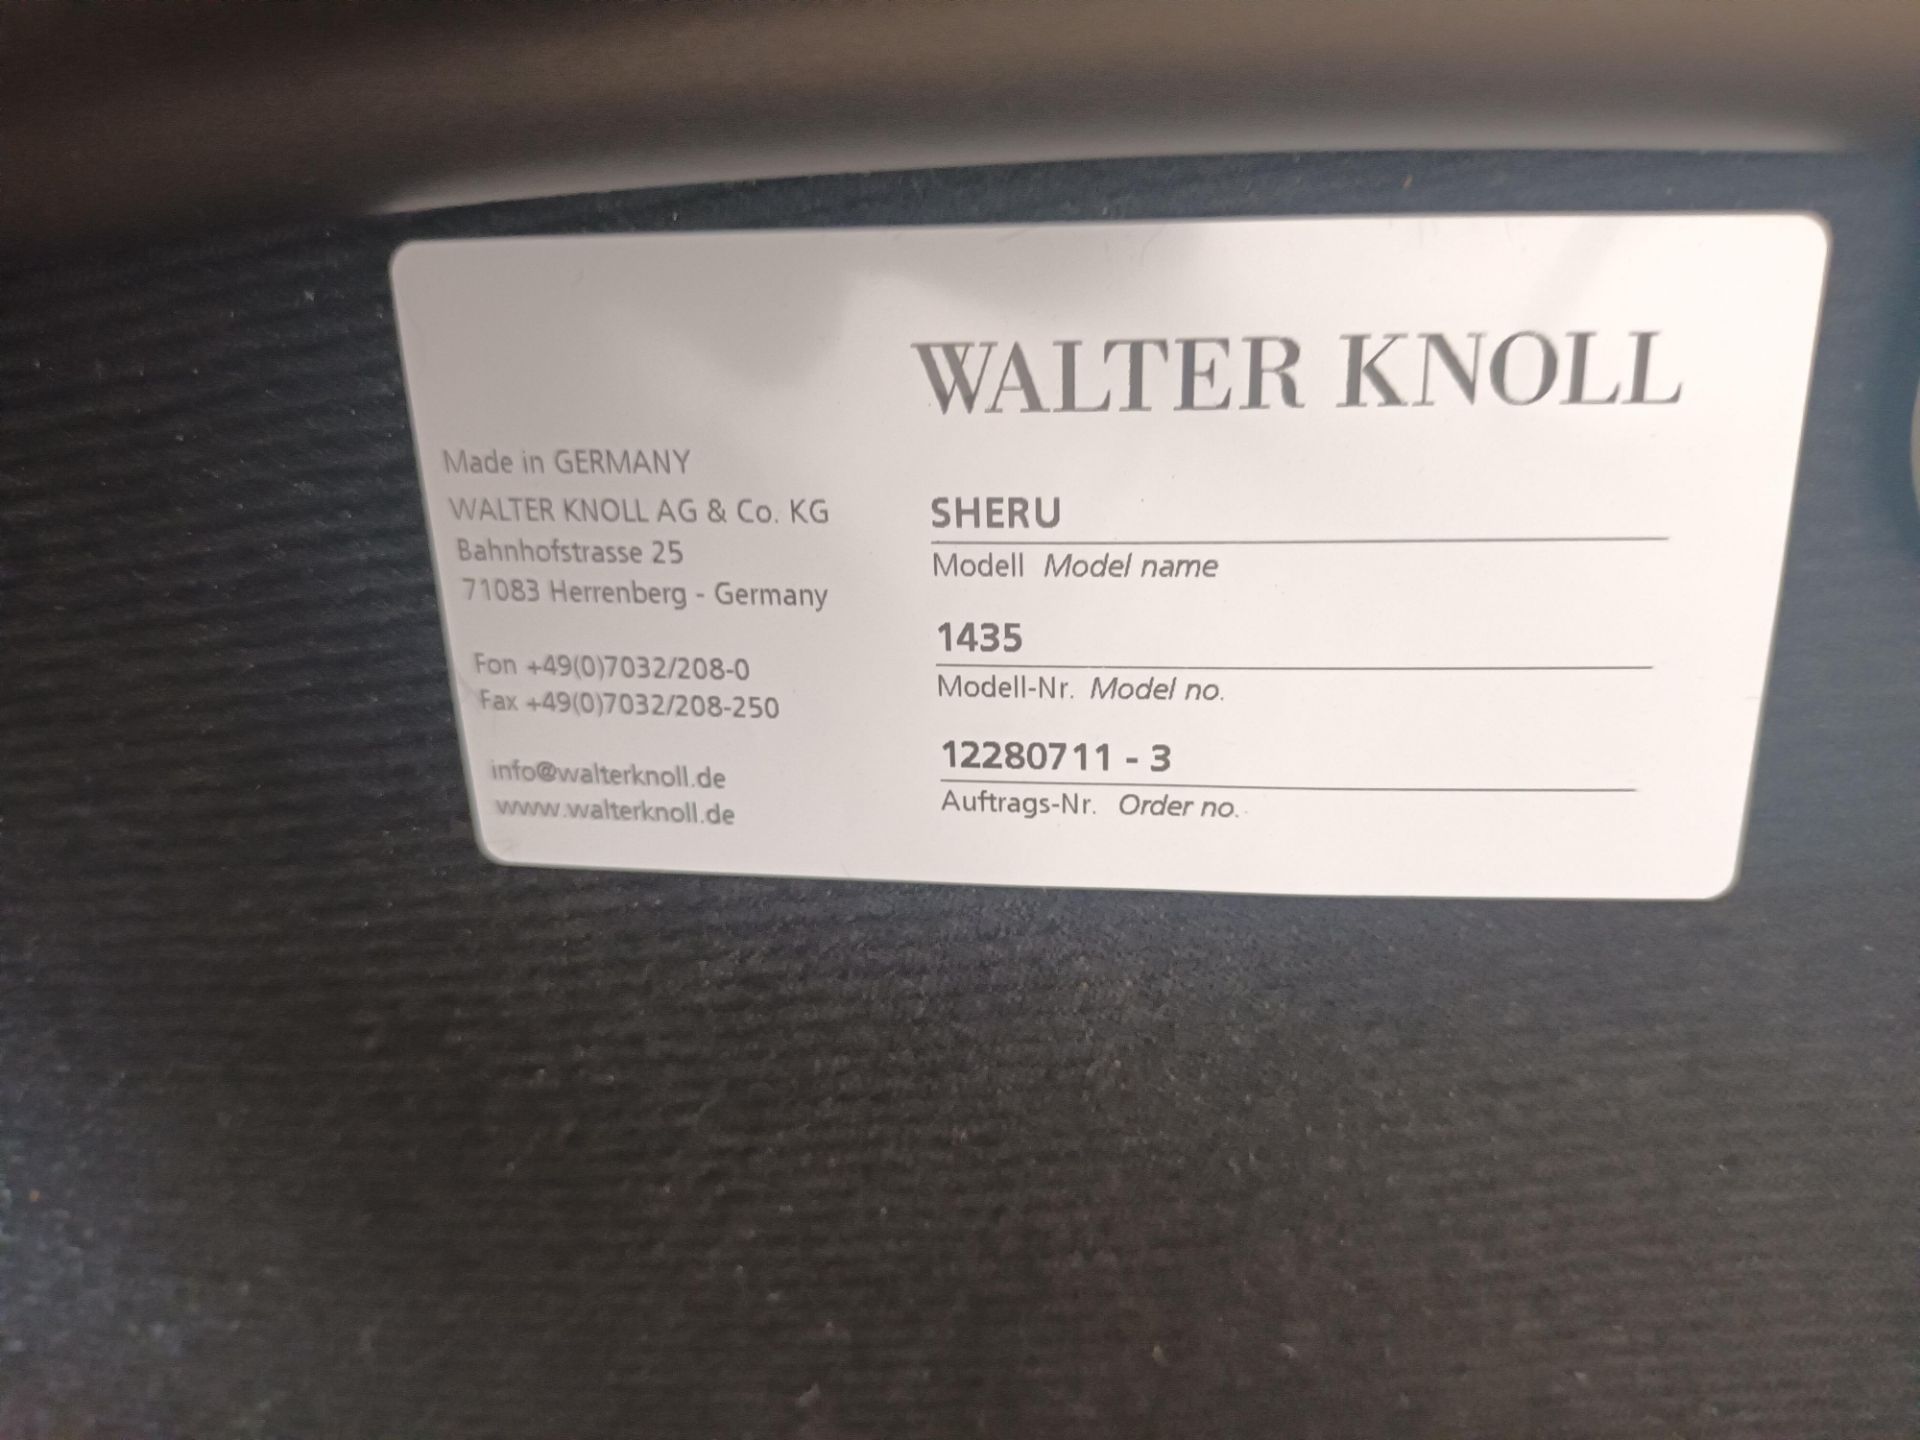 Walter Knoll Sheru 1435 dark blue leather upholstered armchair (Located: Billericay) - Image 2 of 3